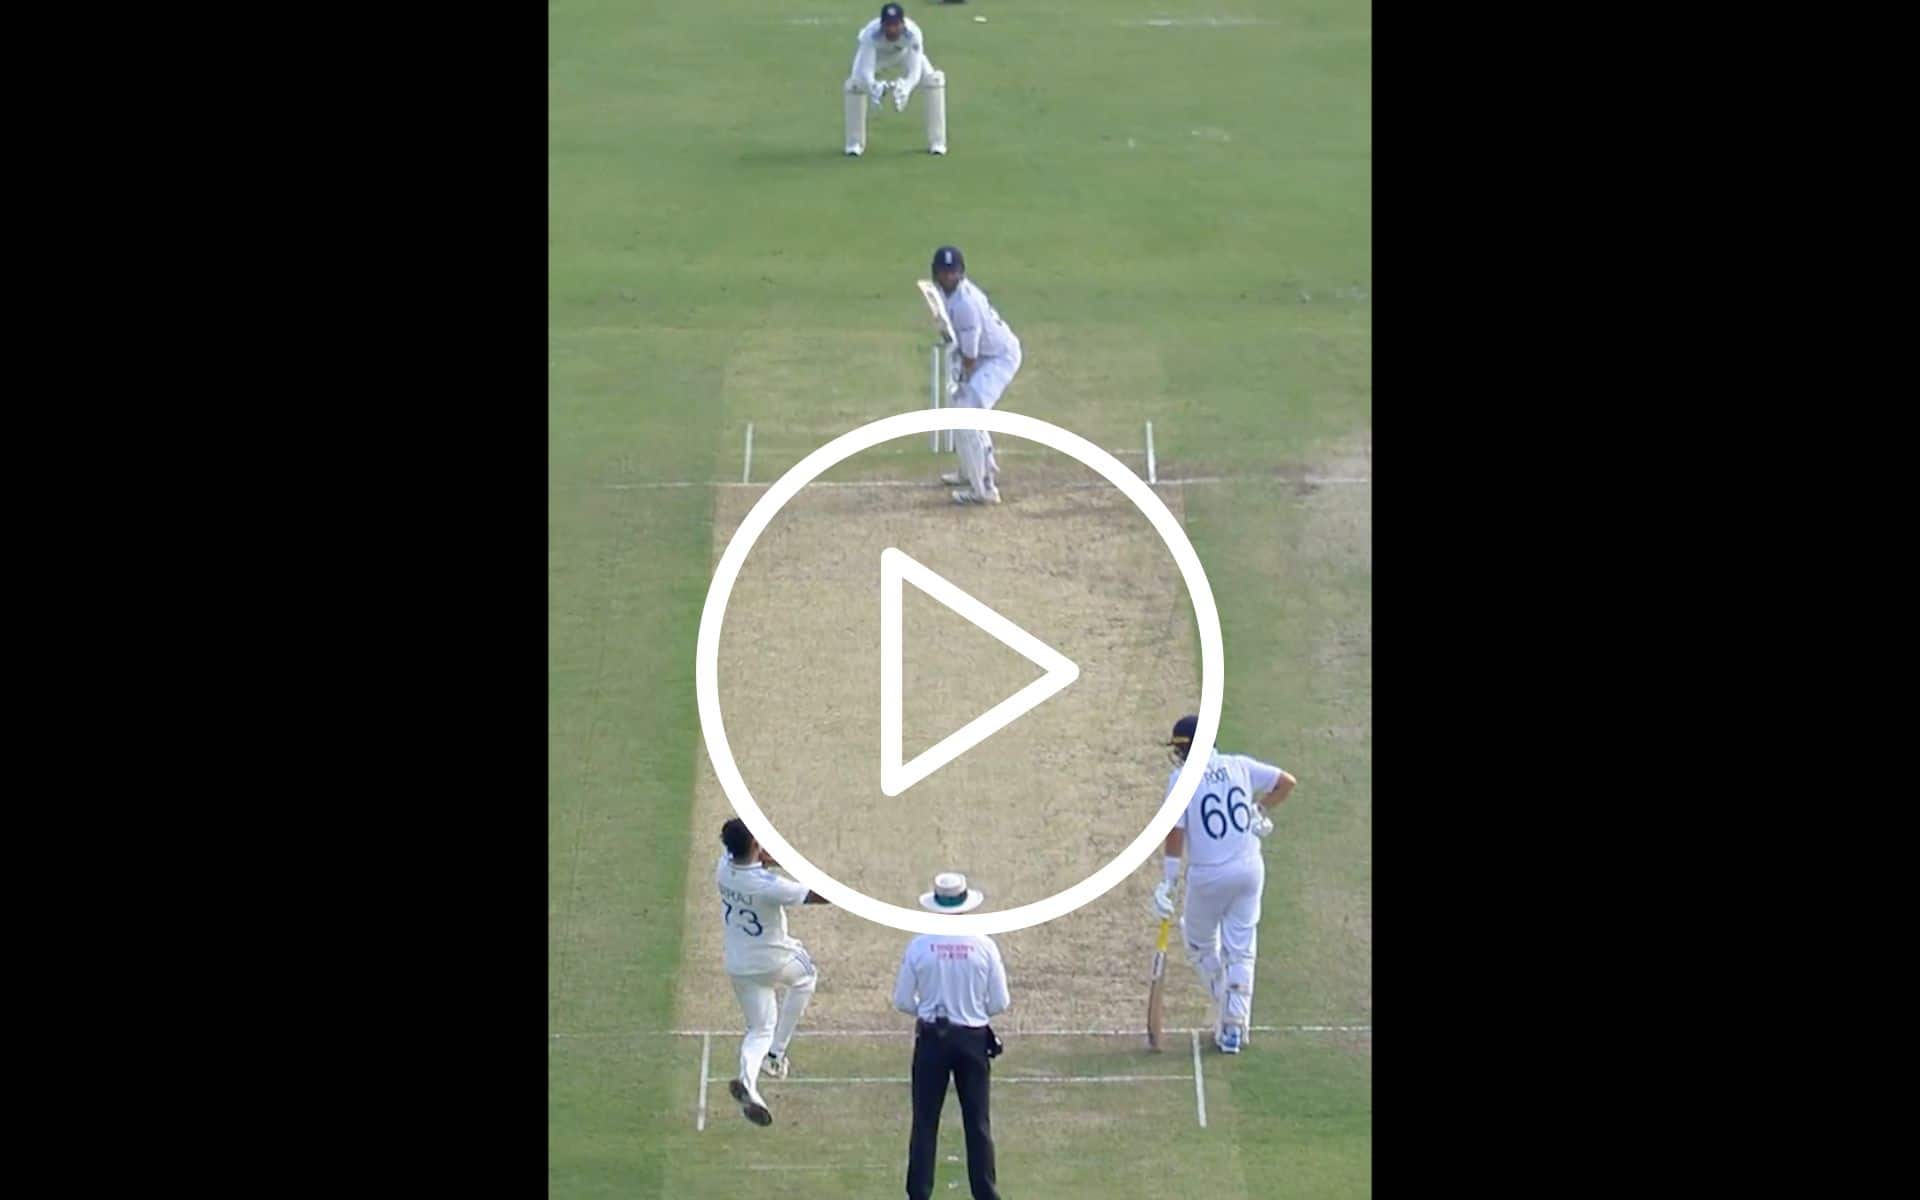 [Watch] Siraj Gives India Much-Needed Relief As Jadeja's Brilliant Catch Ends Foakes' Stay